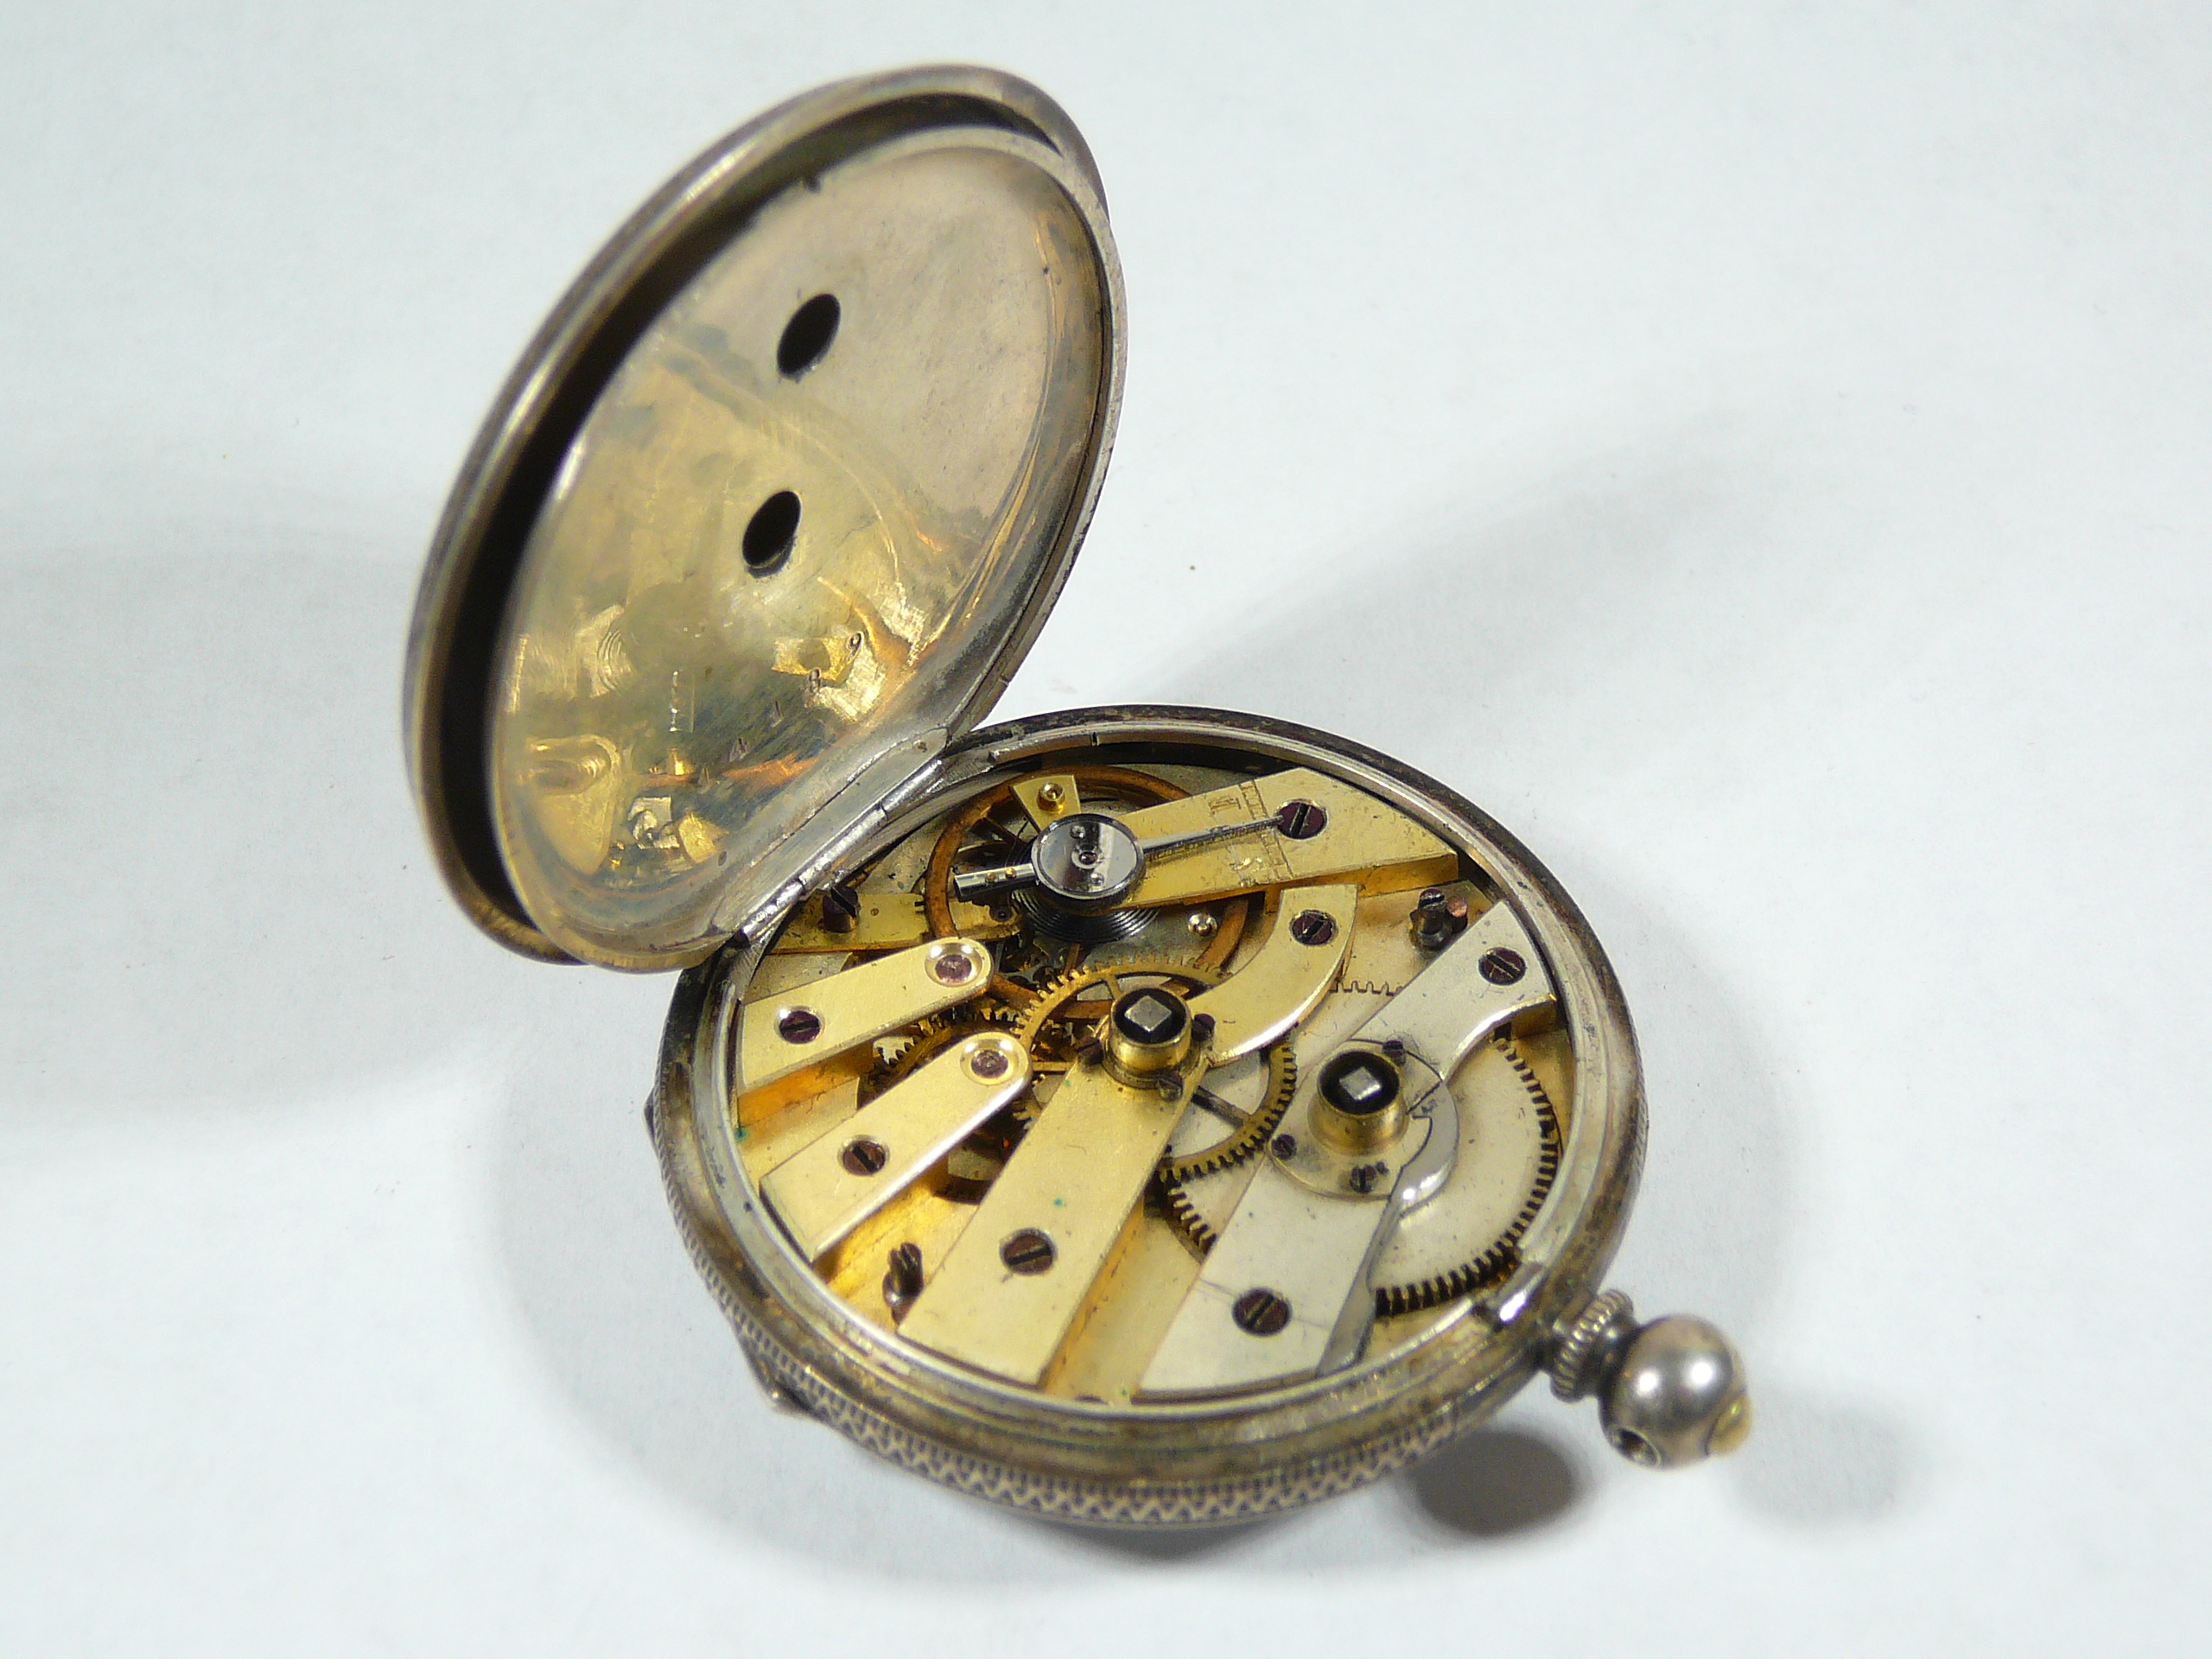 Ladies Antique Silver Fob Watch - Image 3 of 4